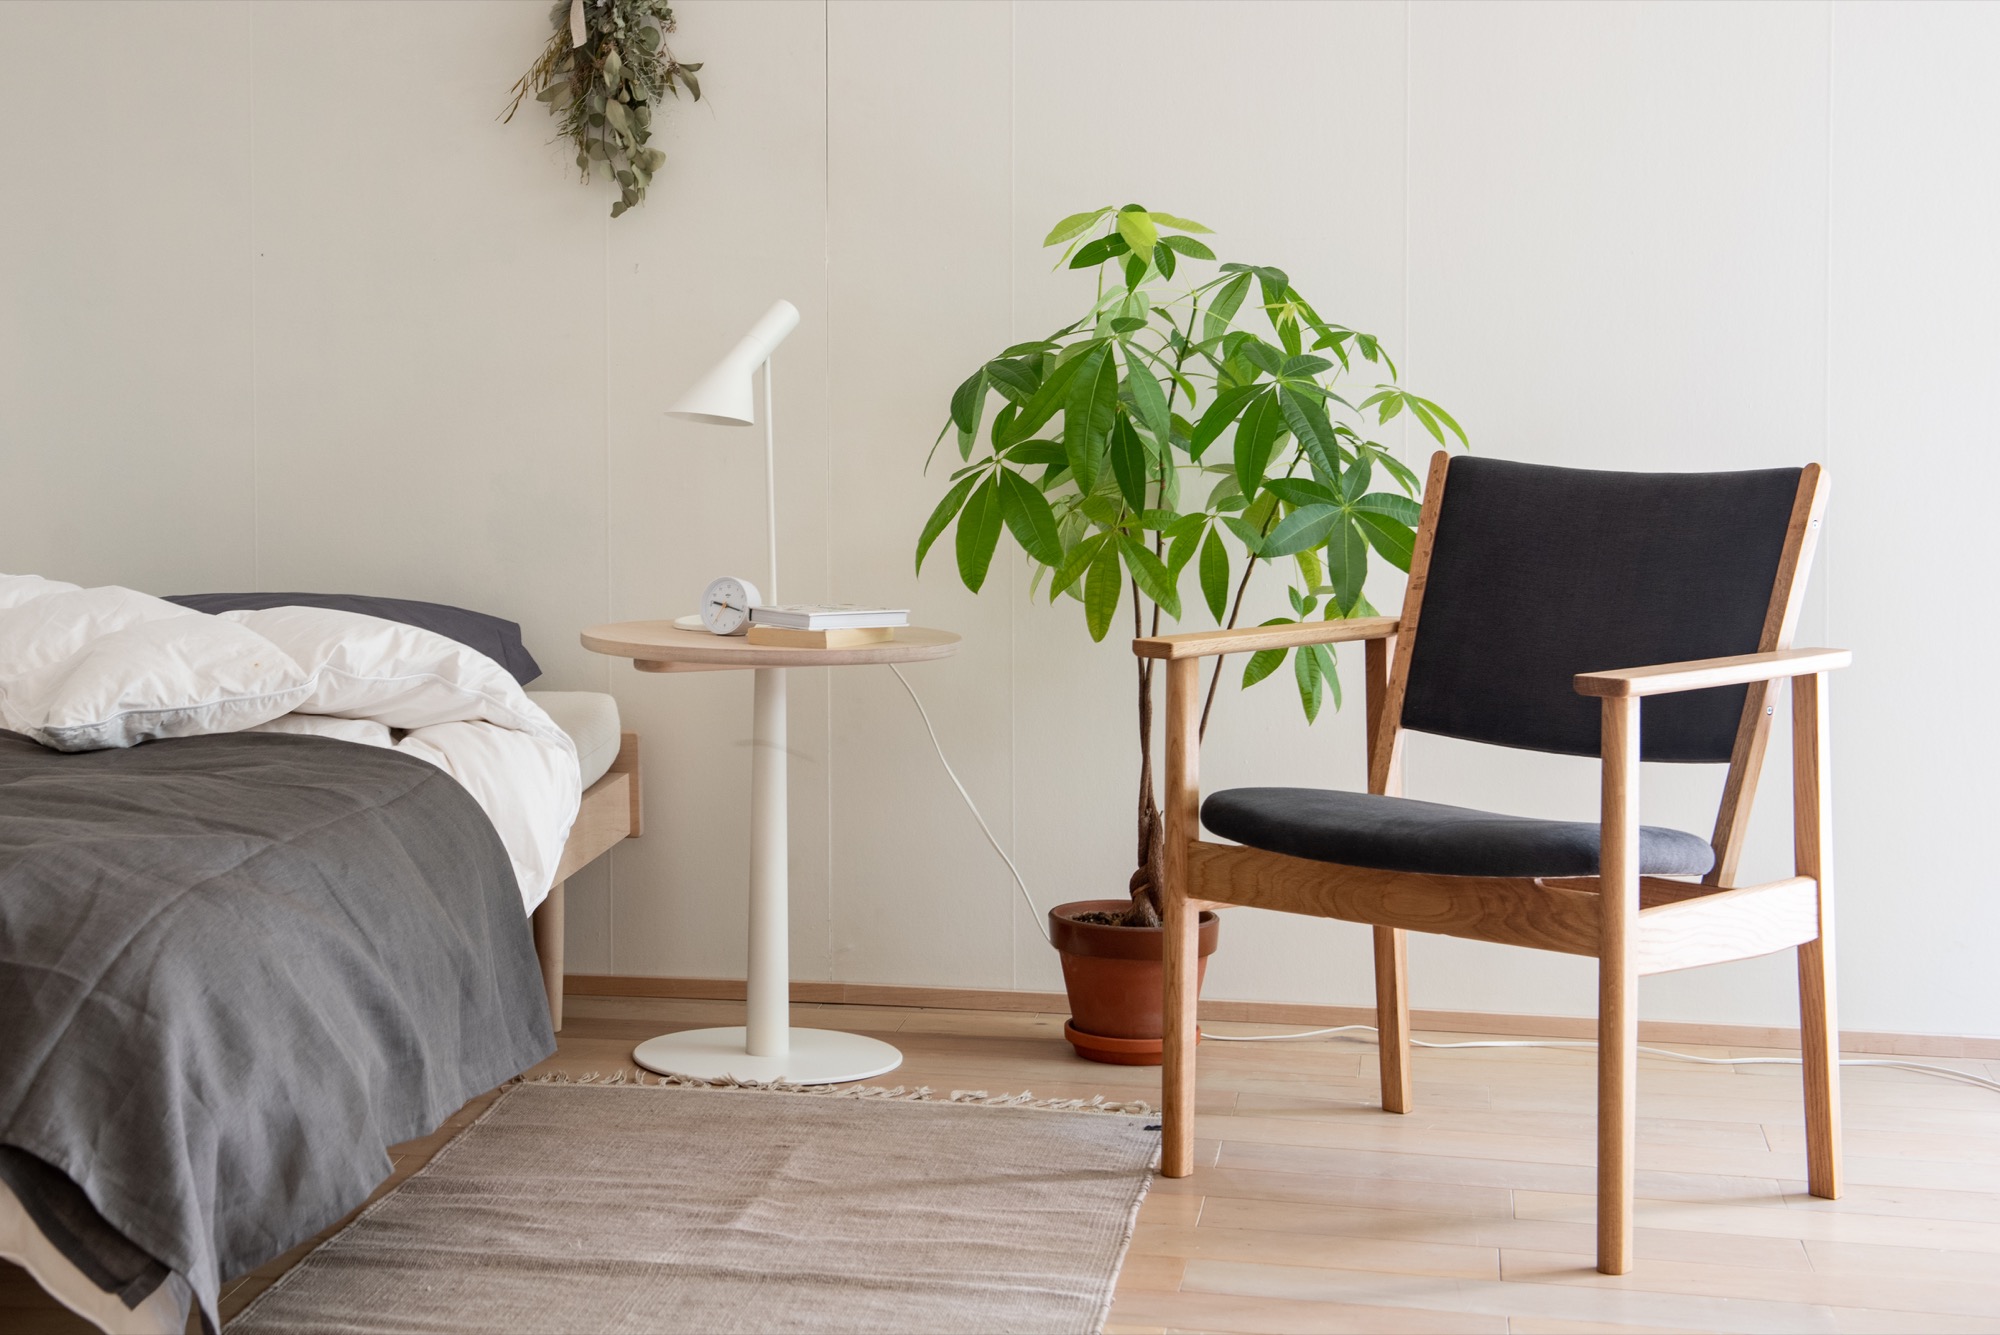 LIM Bed / LIM Living Chair を発表